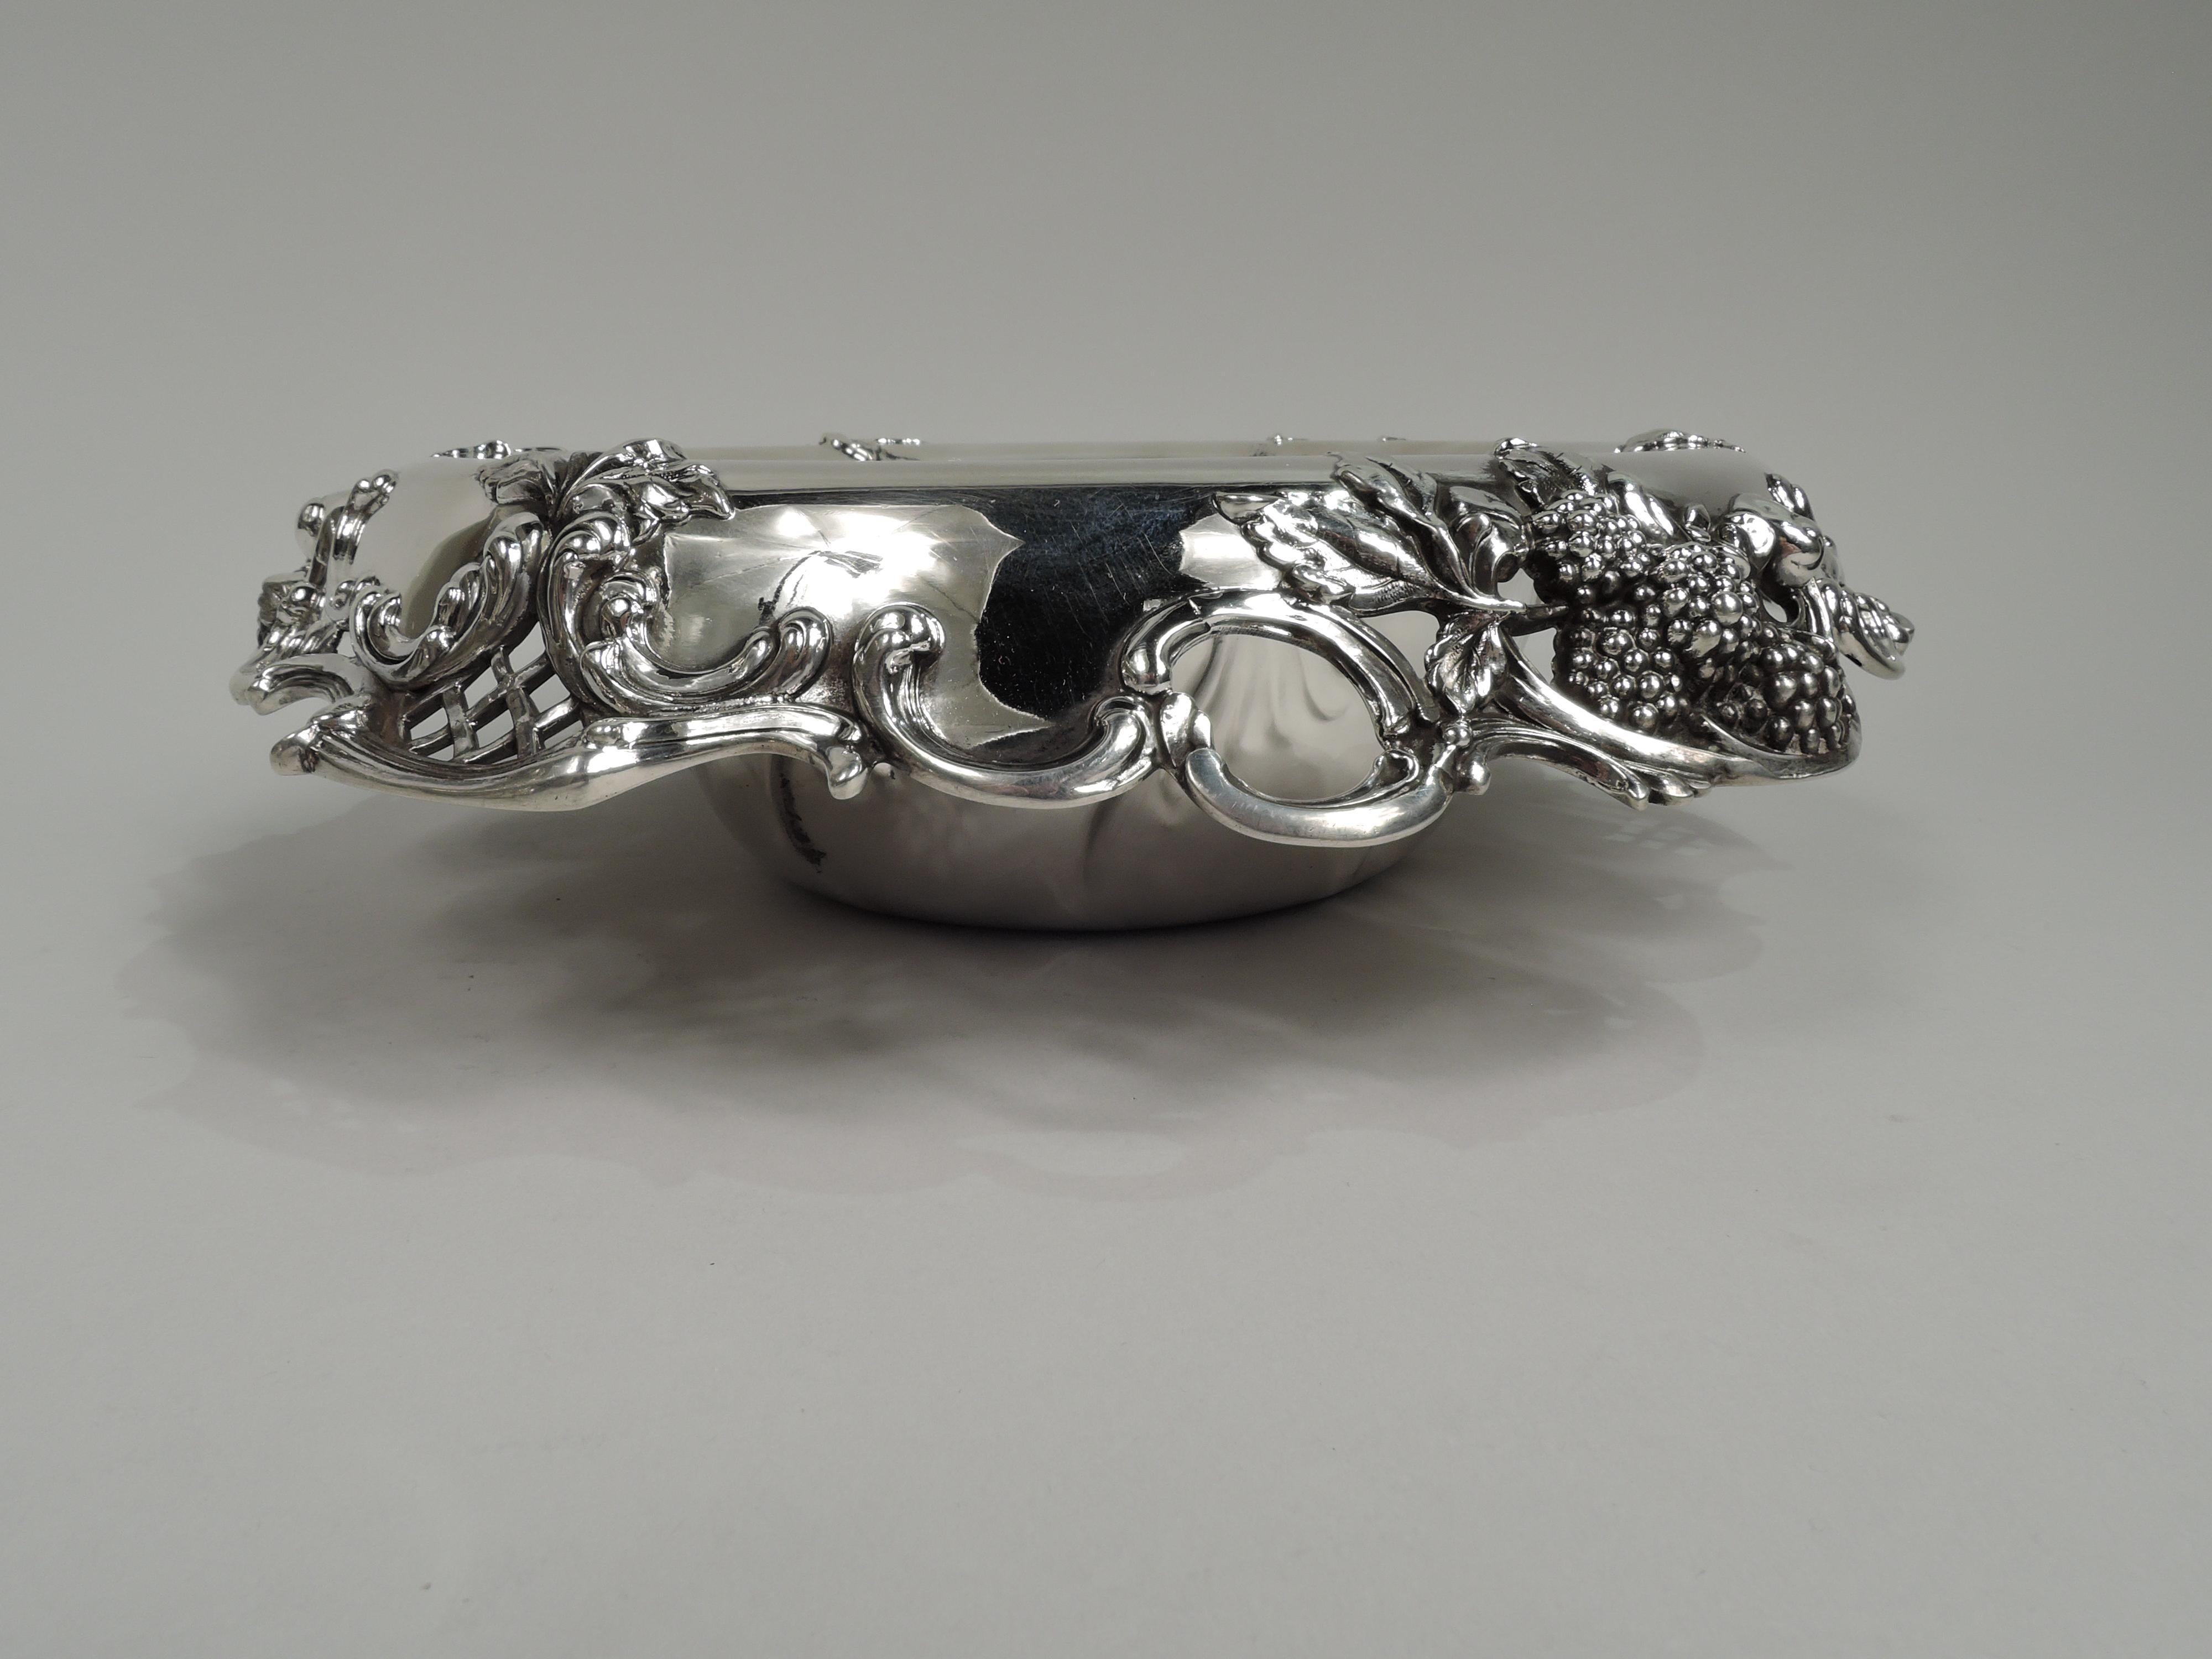 Gilded Age sterling silver berry bowl. Made by Tiffany & Co. in New York. Round with chased outsized leaf border. Scrolled and open turned down rim with applied c-scrolls, leaves, berries, and diaper. A great high-low design with wild fruit wrought